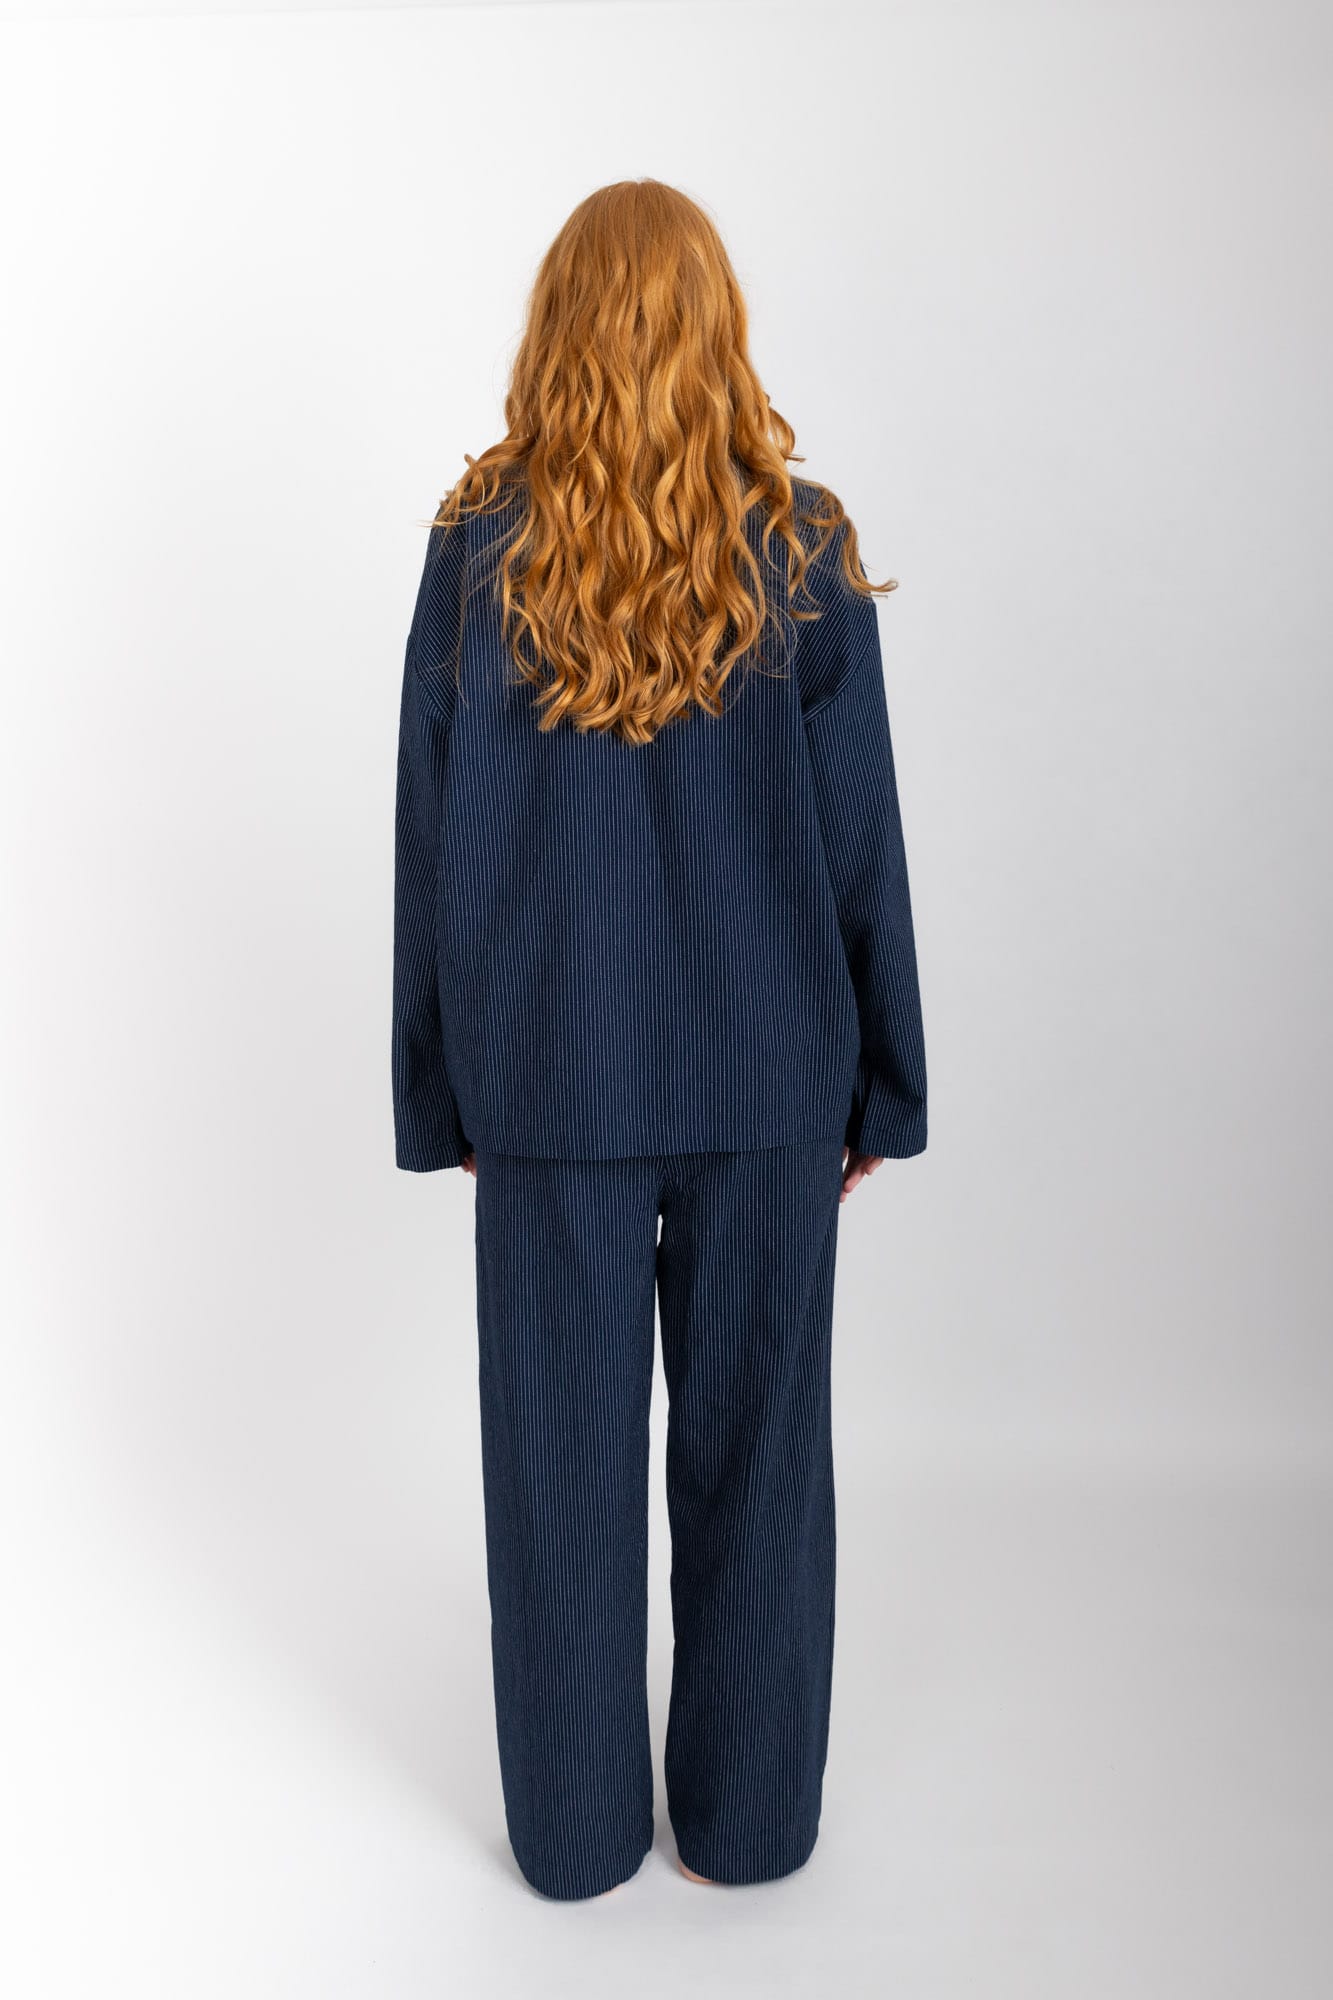 Women’s sleepwear set featuring an oversized, dropped-shoulder, button-through shirt, with natural shell buttons.  The loose-fit, straight-leg pants have an elasticated waist, flat front, and drawstring detail, and are comfortable and flattering. Made from 100% organic cotton in Navy Pinstripe, both pieces have been finished with French seams.